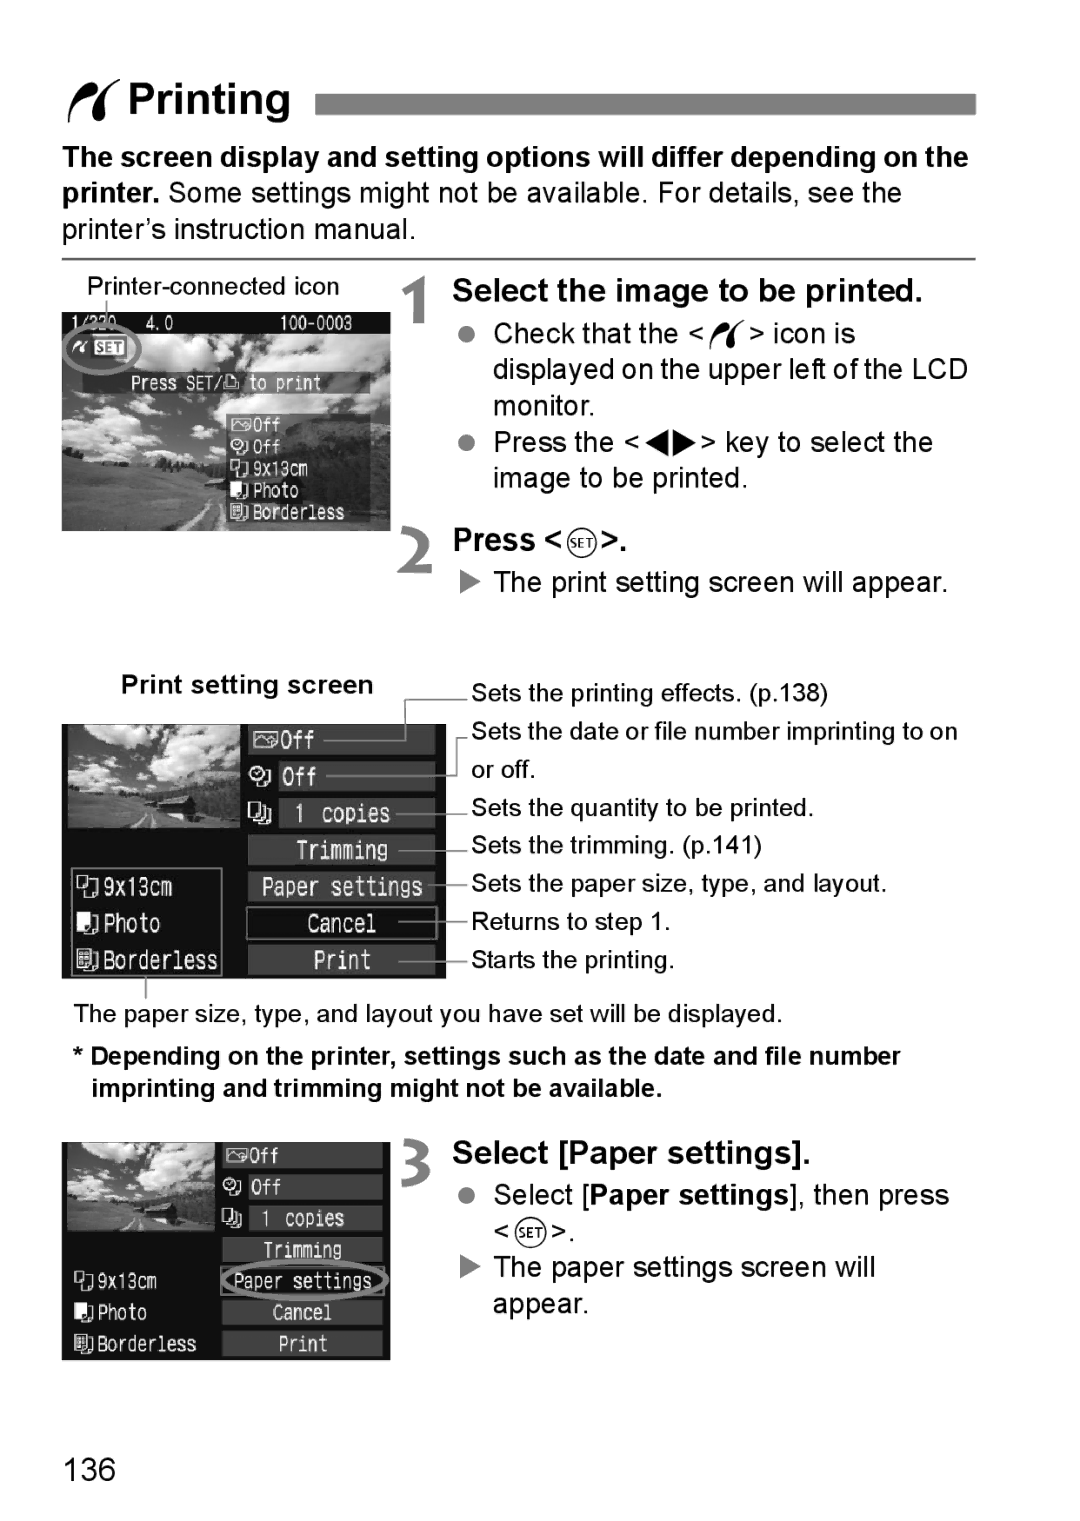 Canon EOS 450D instruction manual WPrinting, Select the image to be printed, Select Paper settings, 136 